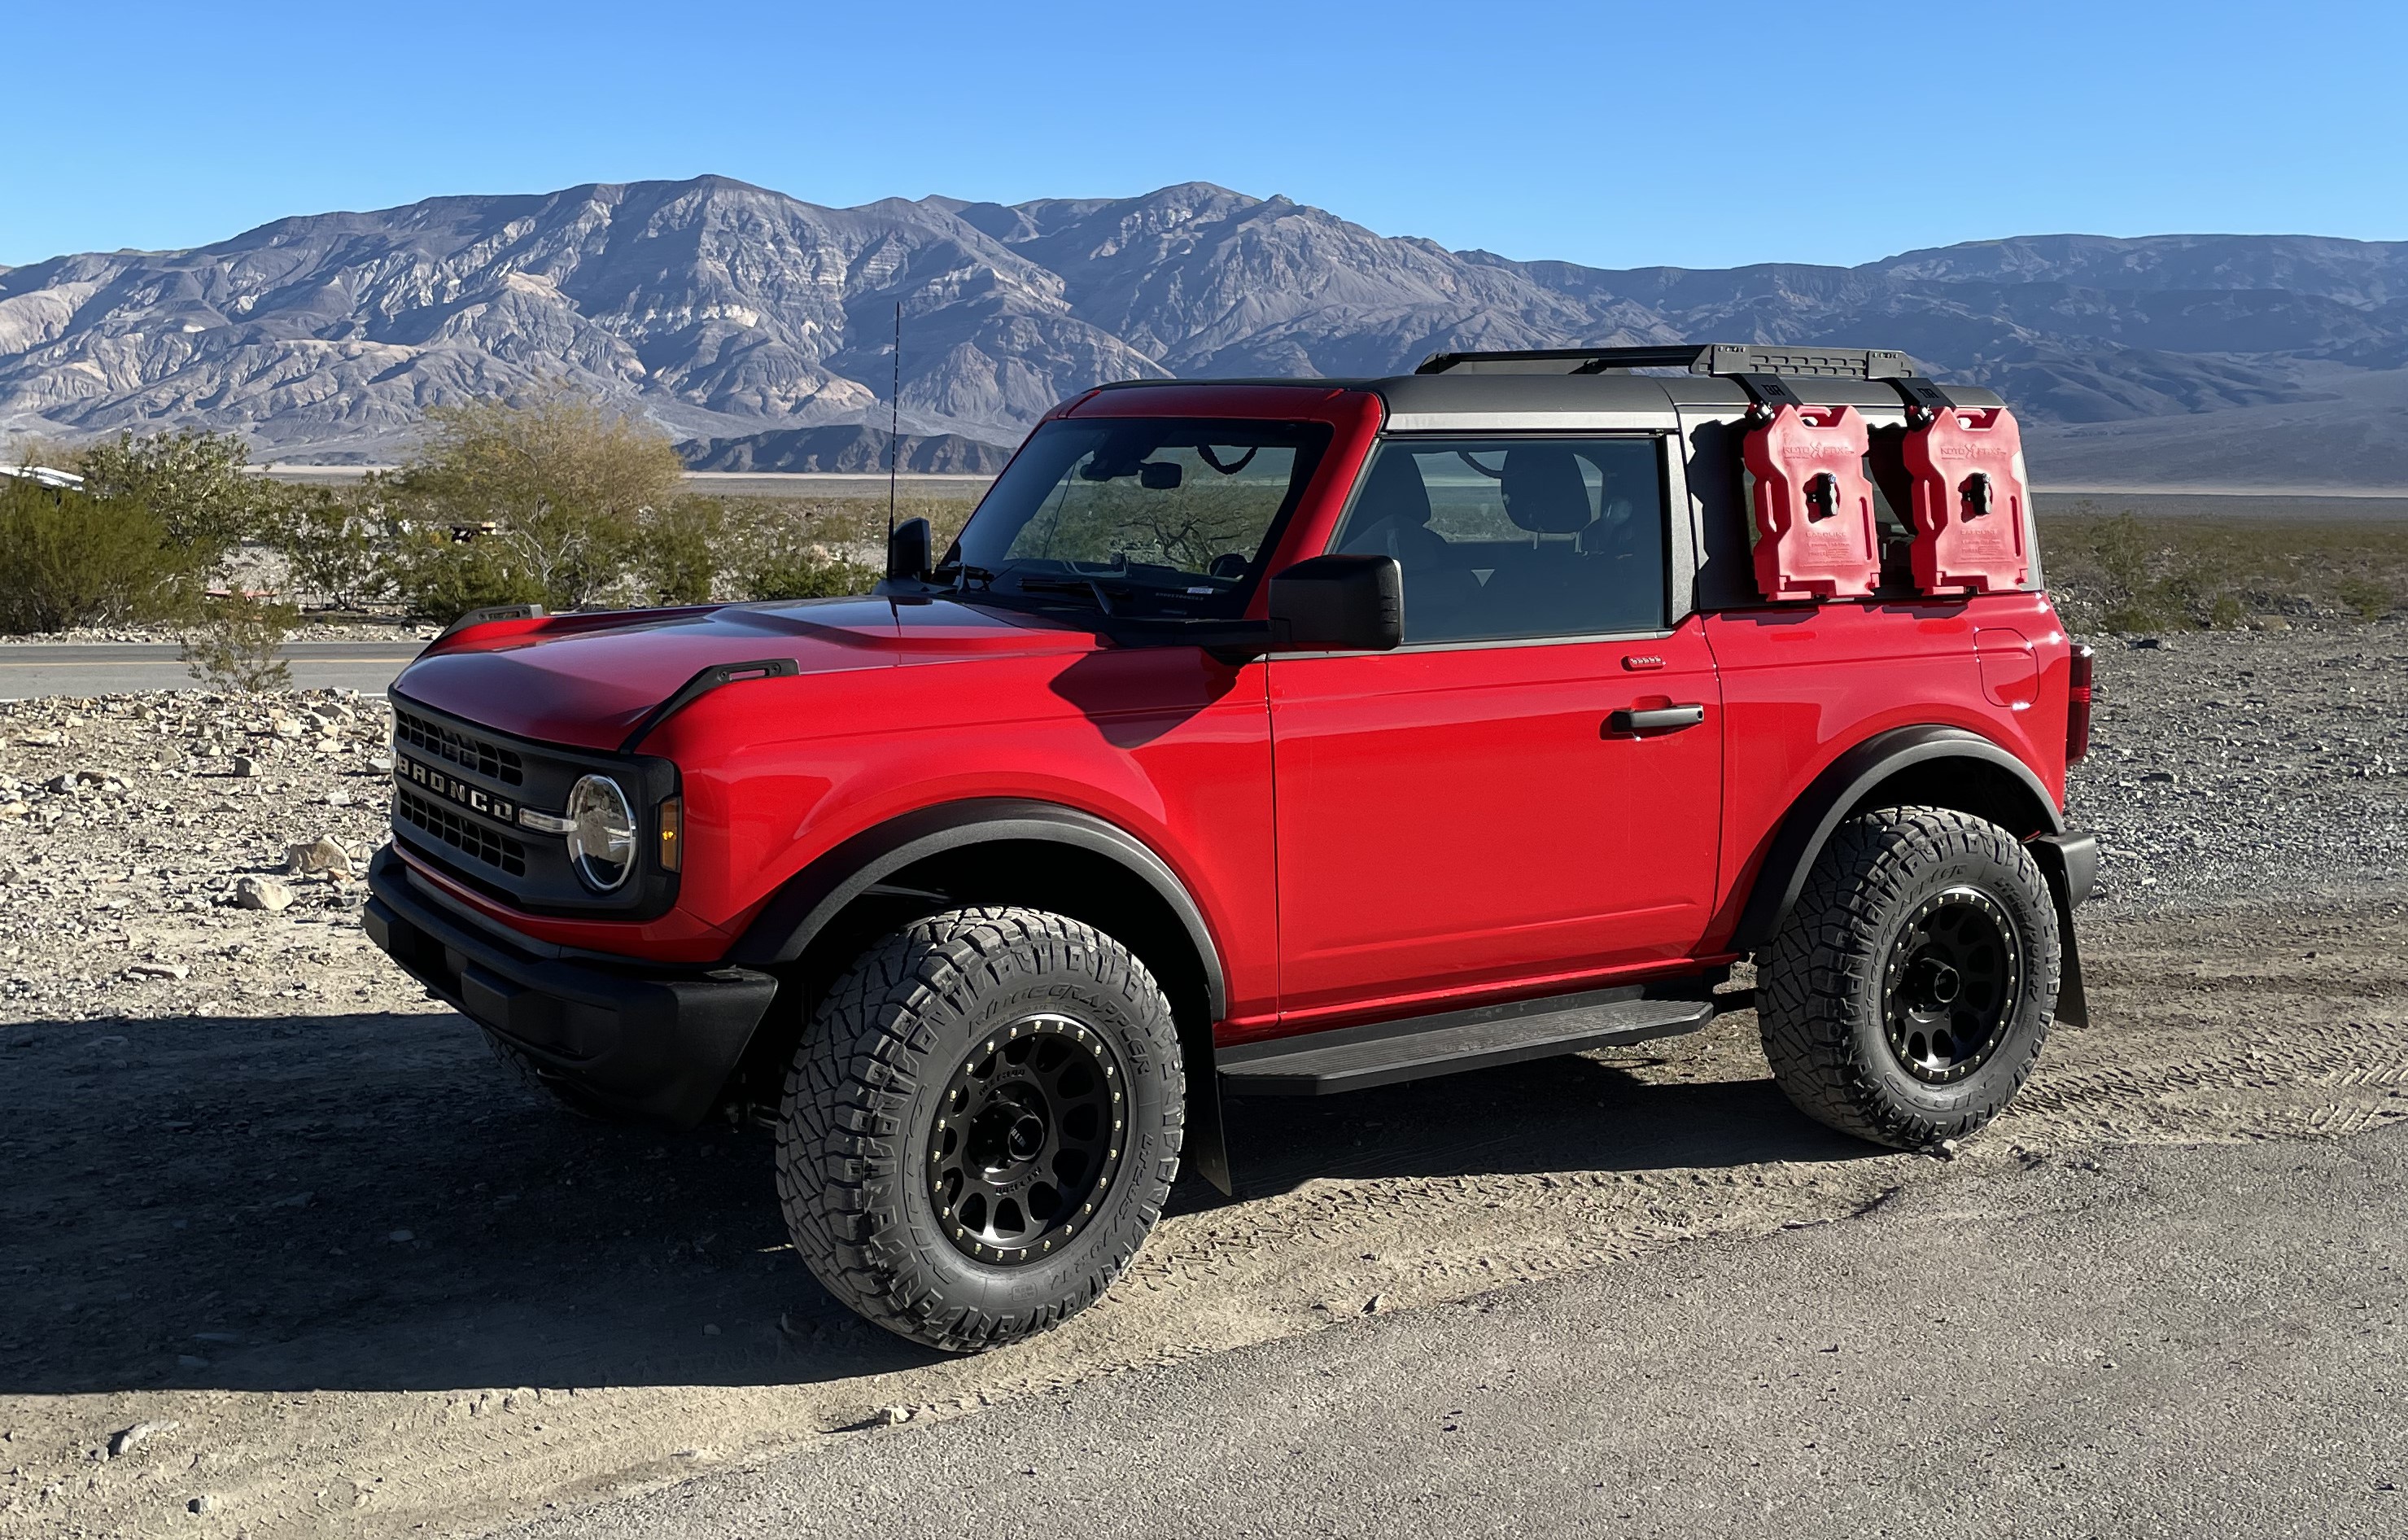 Ford Bronco Have a name / nickname for your Bronco? Bronco Death Valley v2